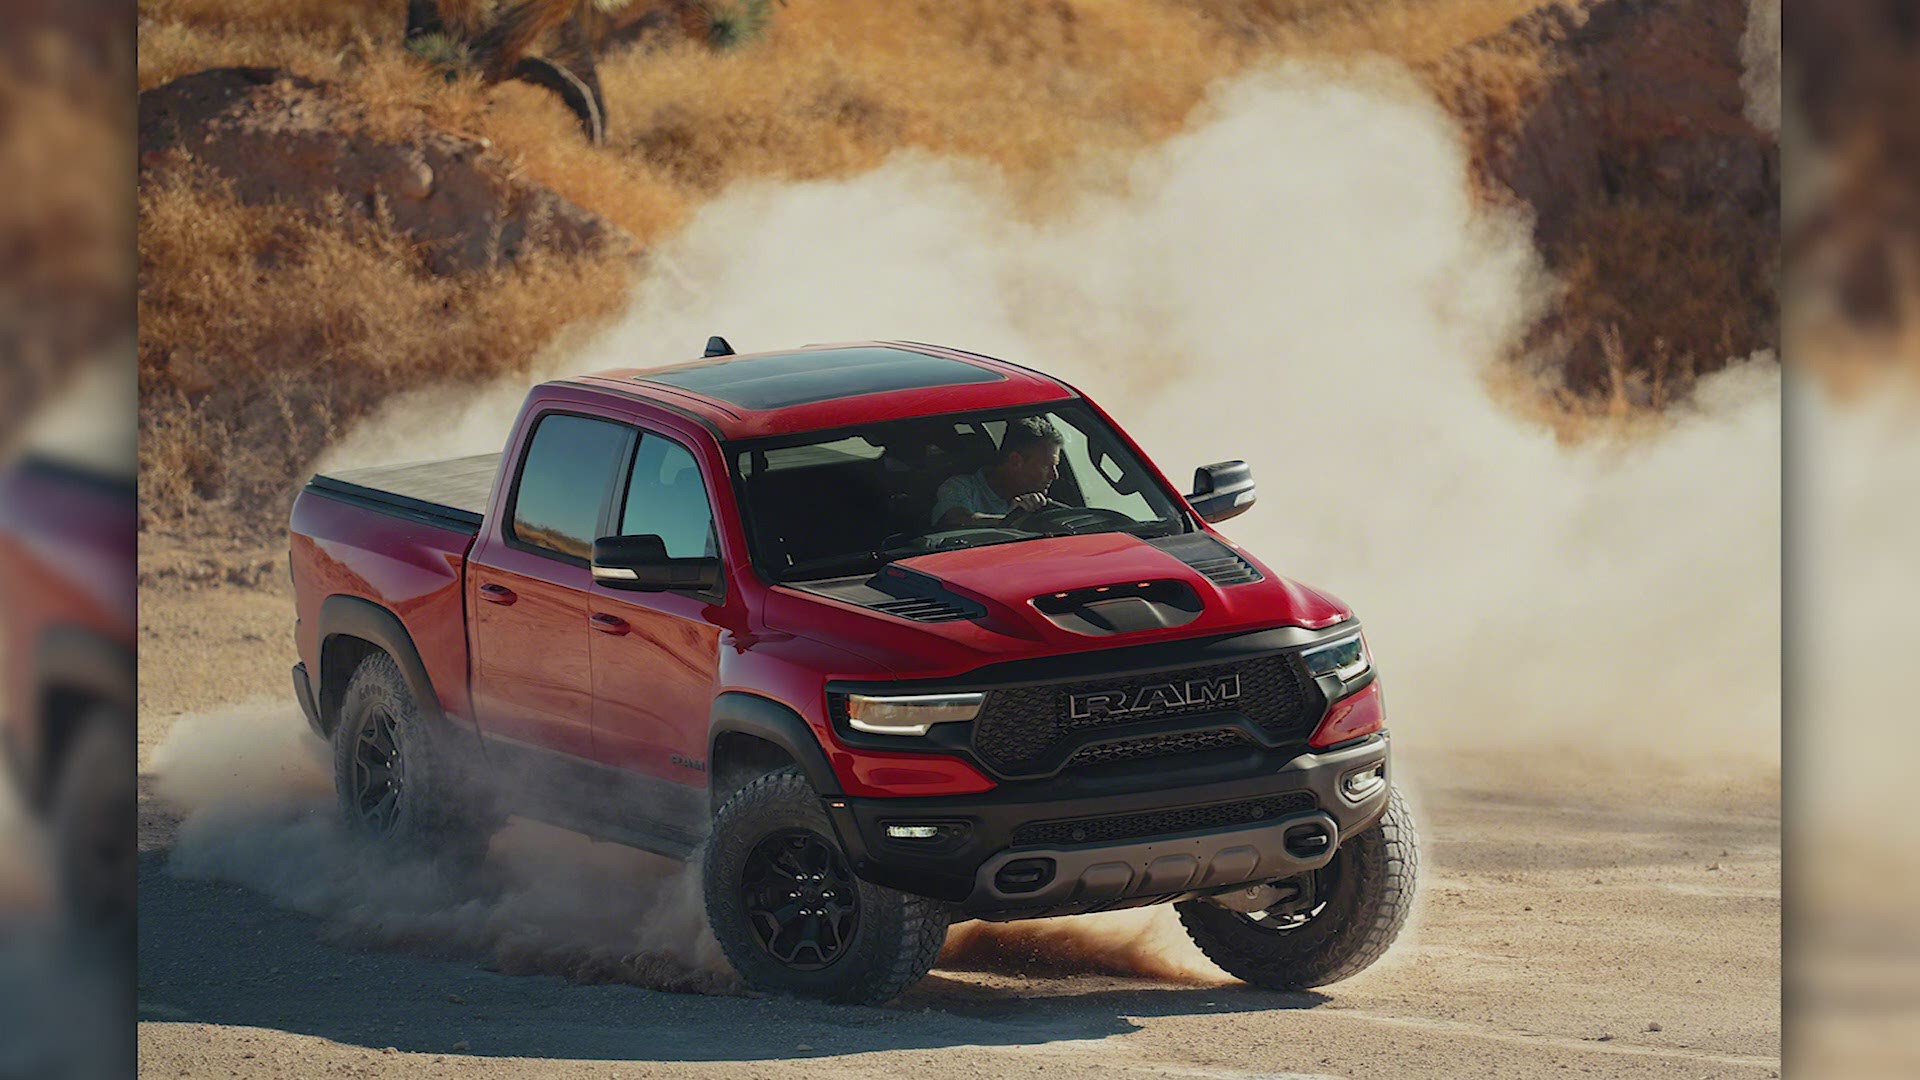 Fiat Chrysler says this high-speed off-road pick-up can go from zero to 60 in 4.5 seconds